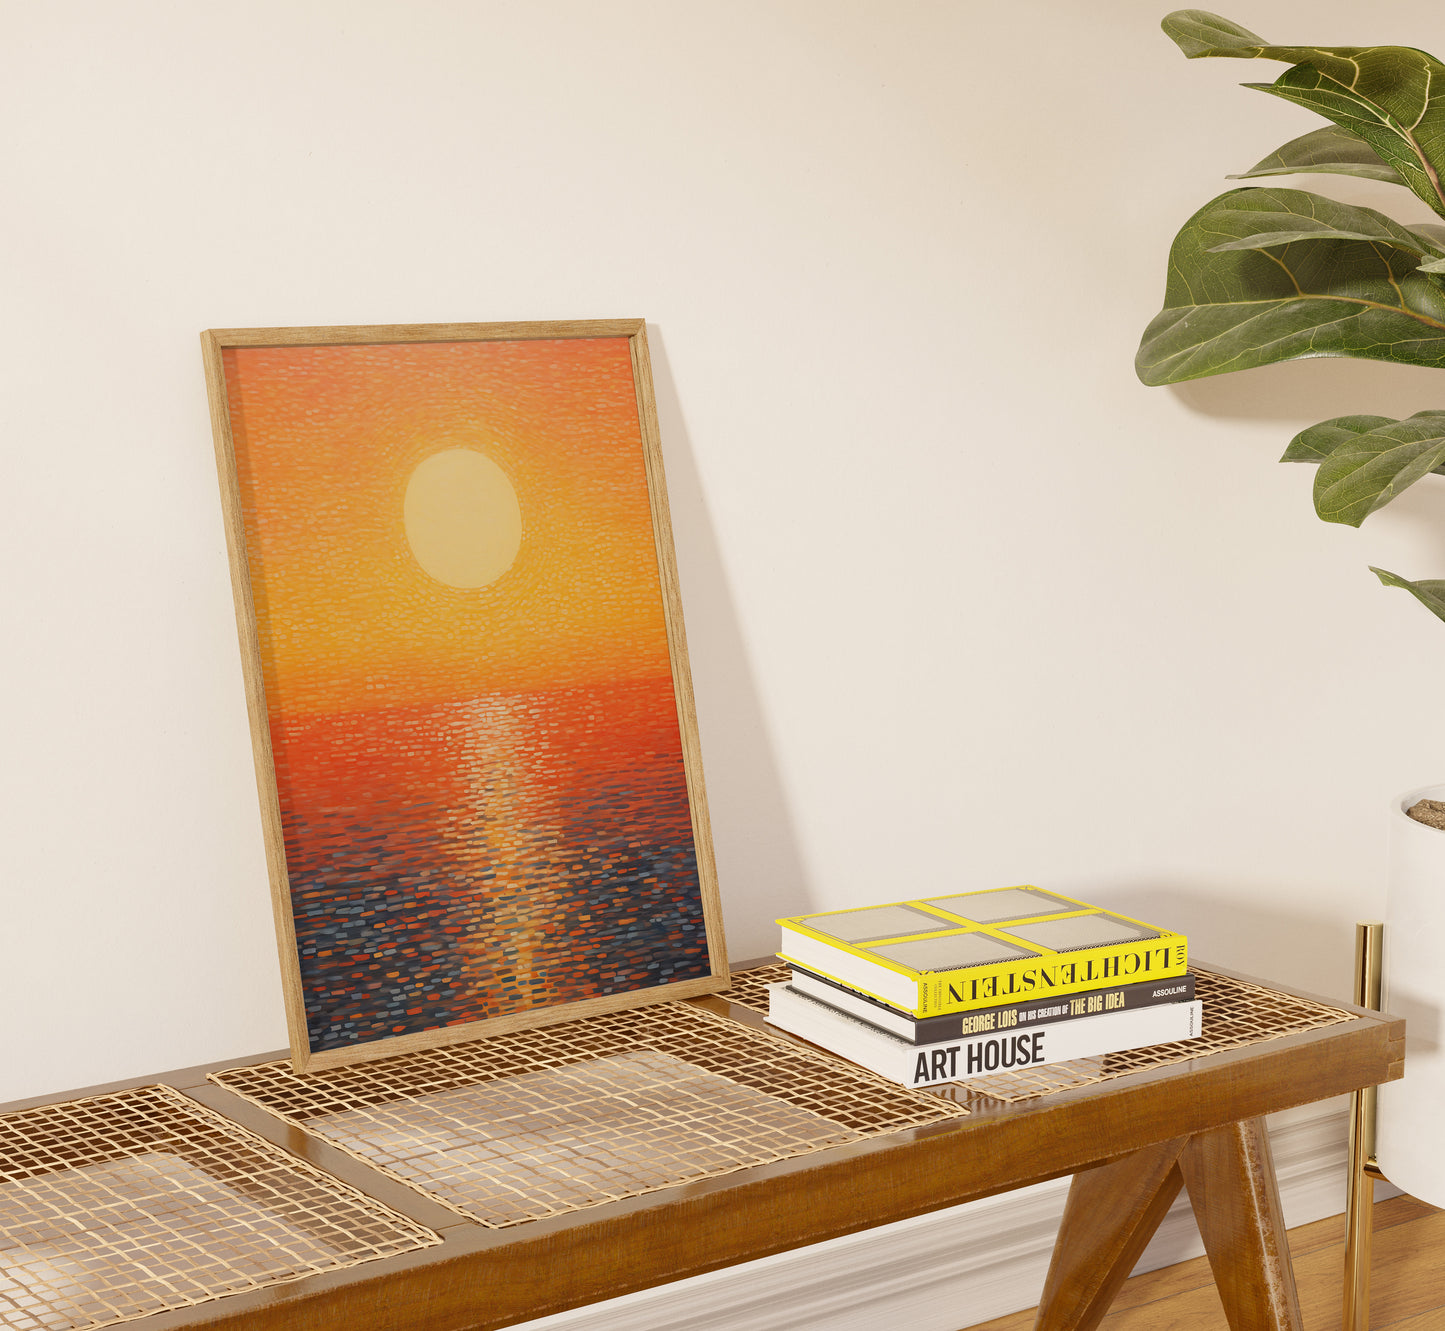 Framed sunset painting on a wall above a console with books and a plant.